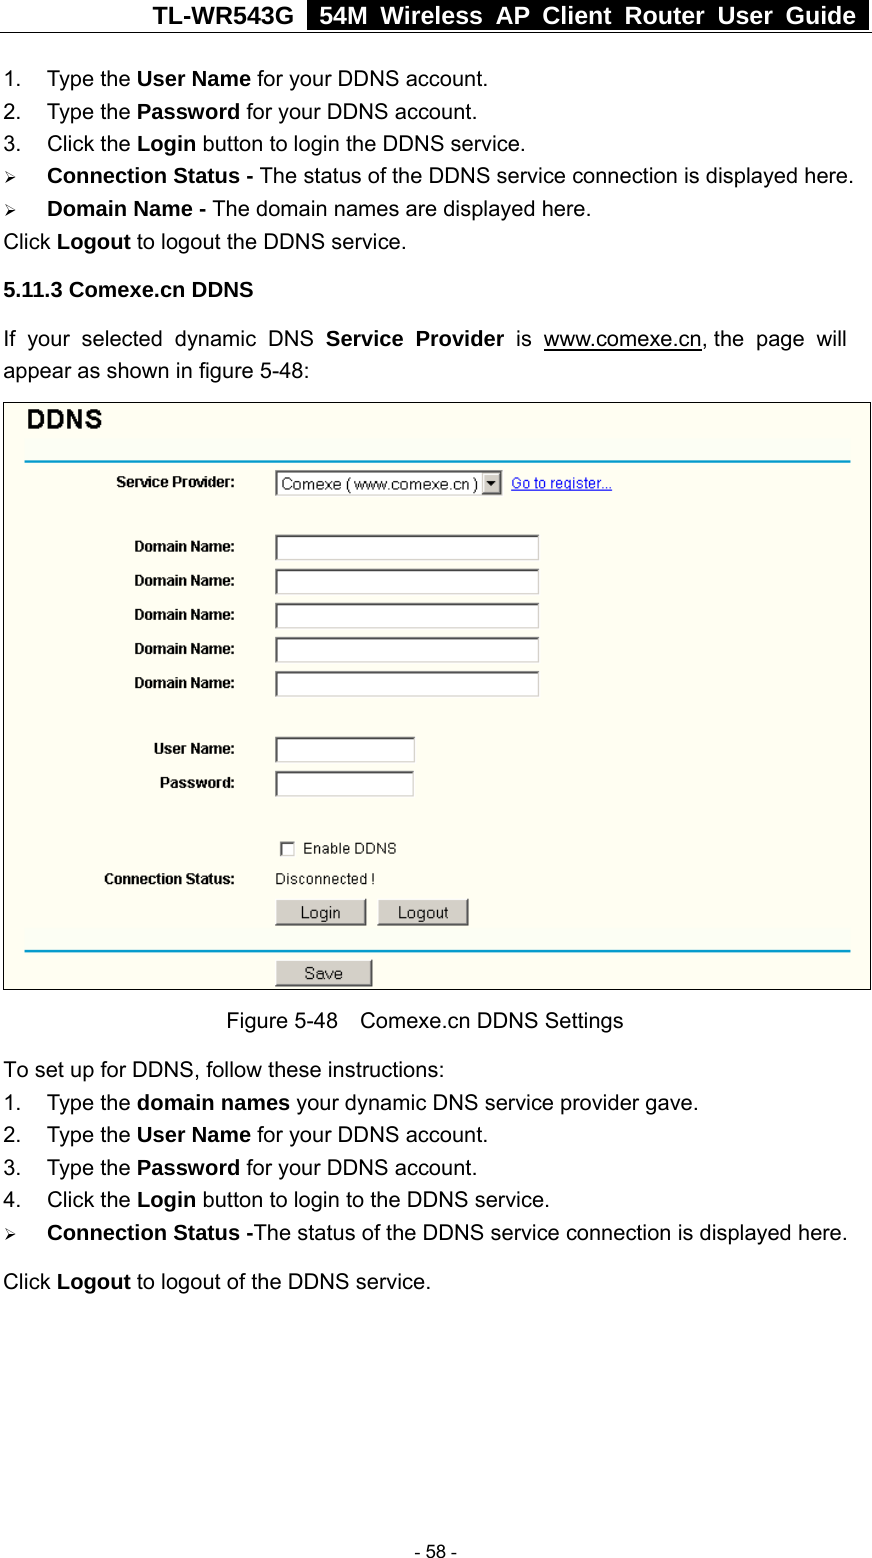 TL-WR543G   54M Wireless AP Client Router User Guide  1. Type the User Name for your DDNS account.   2. Type the Password for your DDNS account.   3. Click the Login button to login the DDNS service.   ¾ Connection Status - The status of the DDNS service connection is displayed here. ¾ Domain Name - The domain names are displayed here. Click Logout to logout the DDNS service. 5.11.3 Comexe.cn DDNS If your selected dynamic DNS Service Provider is www.comexe.cn, the page will appear as shown in figure 5-48:  Figure 5-48    Comexe.cn DDNS Settings To set up for DDNS, follow these instructions: 1. Type the domain names your dynamic DNS service provider gave.   2. Type the User Name for your DDNS account.   3. Type the Password for your DDNS account.   4. Click the Login button to login to the DDNS service. ¾ Connection Status -The status of the DDNS service connection is displayed here. Click Logout to logout of the DDNS service.  - 58 - 